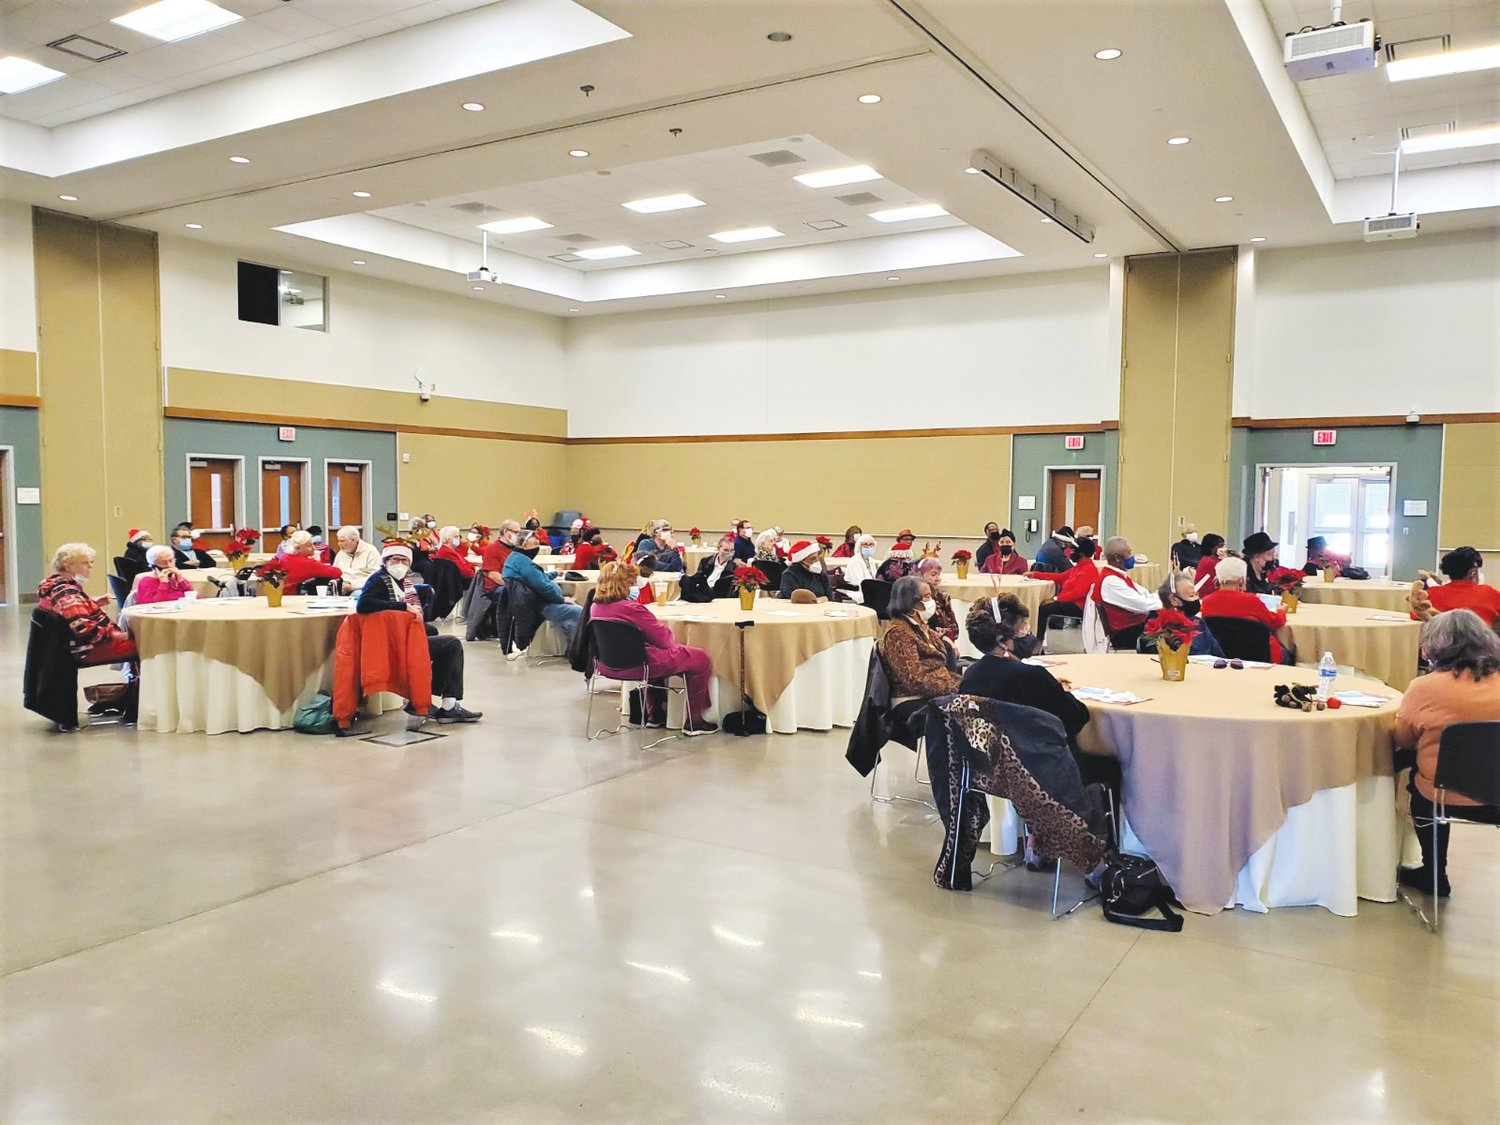 The Council on Aging's holiday party was held at the Chatham County Agriculture & Conference Center in Pittsboro.